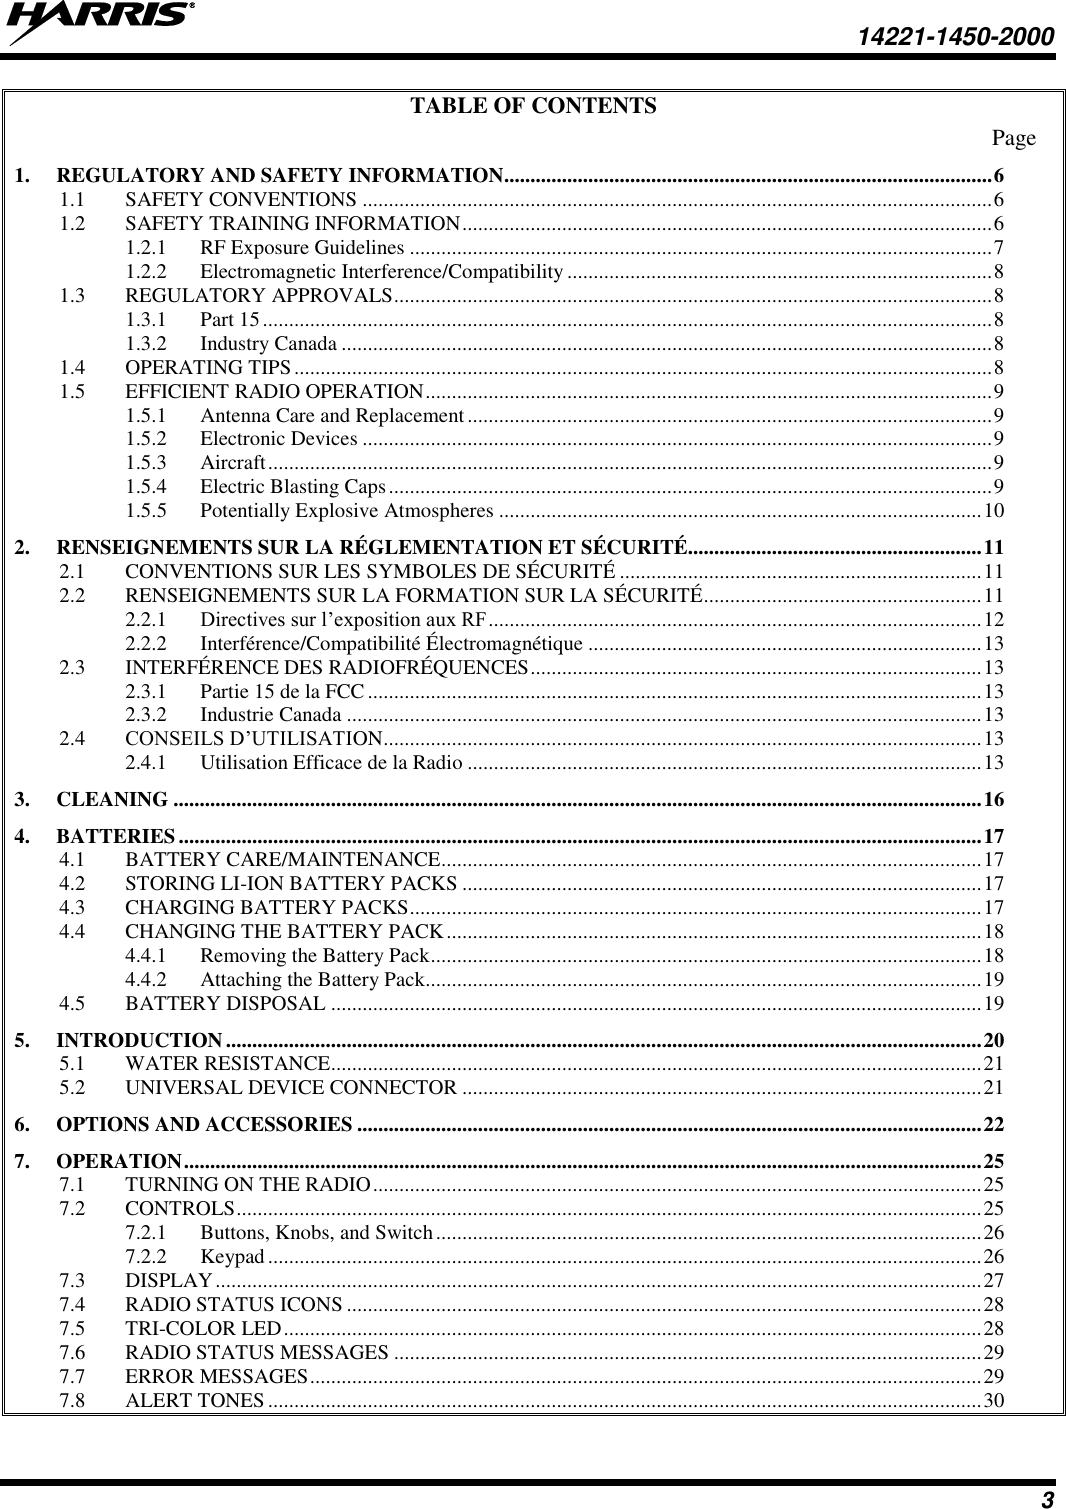   14221-1450-2000  3 TABLE OF CONTENTS Page 1. REGULATORY AND SAFETY INFORMATION ............................................................................................. 6 1.1 SAFETY CONVENTIONS ........................................................................................................................ 6 1.2 SAFETY TRAINING INFORMATION ..................................................................................................... 6 1.2.1 RF Exposure Guidelines ............................................................................................................... 7 1.2.2 Electromagnetic Interference/Compatibility ................................................................................. 8 1.3 REGULATORY APPROVALS .................................................................................................................. 8 1.3.1 Part 15 ........................................................................................................................................... 8 1.3.2 Industry Canada ............................................................................................................................ 8 1.4 OPERATING TIPS ..................................................................................................................................... 8 1.5 EFFICIENT RADIO OPERATION ............................................................................................................ 9 1.5.1 Antenna Care and Replacement .................................................................................................... 9 1.5.2 Electronic Devices ........................................................................................................................ 9 1.5.3 Aircraft .......................................................................................................................................... 9 1.5.4 Electric Blasting Caps ................................................................................................................... 9 1.5.5 Potentially Explosive Atmospheres ............................................................................................ 10 2. RENSEIGNEMENTS SUR LA RÉGLEMENTATION ET SÉCURITÉ........................................................ 11 2.1 CONVENTIONS SUR LES SYMBOLES DE SÉCURITÉ ..................................................................... 11 2.2 RENSEIGNEMENTS SUR LA FORMATION SUR LA SÉCURITÉ ..................................................... 11 2.2.1 Directives sur l’exposition aux RF .............................................................................................. 12 2.2.2 Interférence/Compatibilité Électromagnétique ........................................................................... 13 2.3 INTERFÉRENCE DES RADIOFRÉQUENCES ...................................................................................... 13 2.3.1 Partie 15 de la FCC ..................................................................................................................... 13 2.3.2 Industrie Canada ......................................................................................................................... 13 2.4 CONSEILS D’UTILISATION .................................................................................................................. 13 2.4.1 Utilisation Efficace de la Radio .................................................................................................. 13 3. CLEANING .......................................................................................................................................................... 16 4. BATTERIES ......................................................................................................................................................... 17 4.1 BATTERY CARE/MAINTENANCE ....................................................................................................... 17 4.2 STORING LI-ION BATTERY PACKS ................................................................................................... 17 4.3 CHARGING BATTERY PACKS ............................................................................................................. 17 4.4 CHANGING THE BATTERY PACK ...................................................................................................... 18 4.4.1 Removing the Battery Pack ......................................................................................................... 18 4.4.2 Attaching the Battery Pack.......................................................................................................... 19 4.5 BATTERY DISPOSAL ............................................................................................................................ 19 5. INTRODUCTION ................................................................................................................................................ 20 5.1 WATER RESISTANCE............................................................................................................................ 21 5.2 UNIVERSAL DEVICE CONNECTOR ................................................................................................... 21 6. OPTIONS AND ACCESSORIES ....................................................................................................................... 22 7. OPERATION ........................................................................................................................................................ 25 7.1 TURNING ON THE RADIO .................................................................................................................... 25 7.2 CONTROLS .............................................................................................................................................. 25 7.2.1 Buttons, Knobs, and Switch ........................................................................................................ 26 7.2.2 Keypad ........................................................................................................................................ 26 7.3 DISPLAY .................................................................................................................................................. 27 7.4 RADIO STATUS ICONS ......................................................................................................................... 28 7.5 TRI-COLOR LED ..................................................................................................................................... 28 7.6 RADIO STATUS MESSAGES ................................................................................................................ 29 7.7 ERROR MESSAGES ................................................................................................................................ 29 7.8 ALERT TONES ........................................................................................................................................ 30 